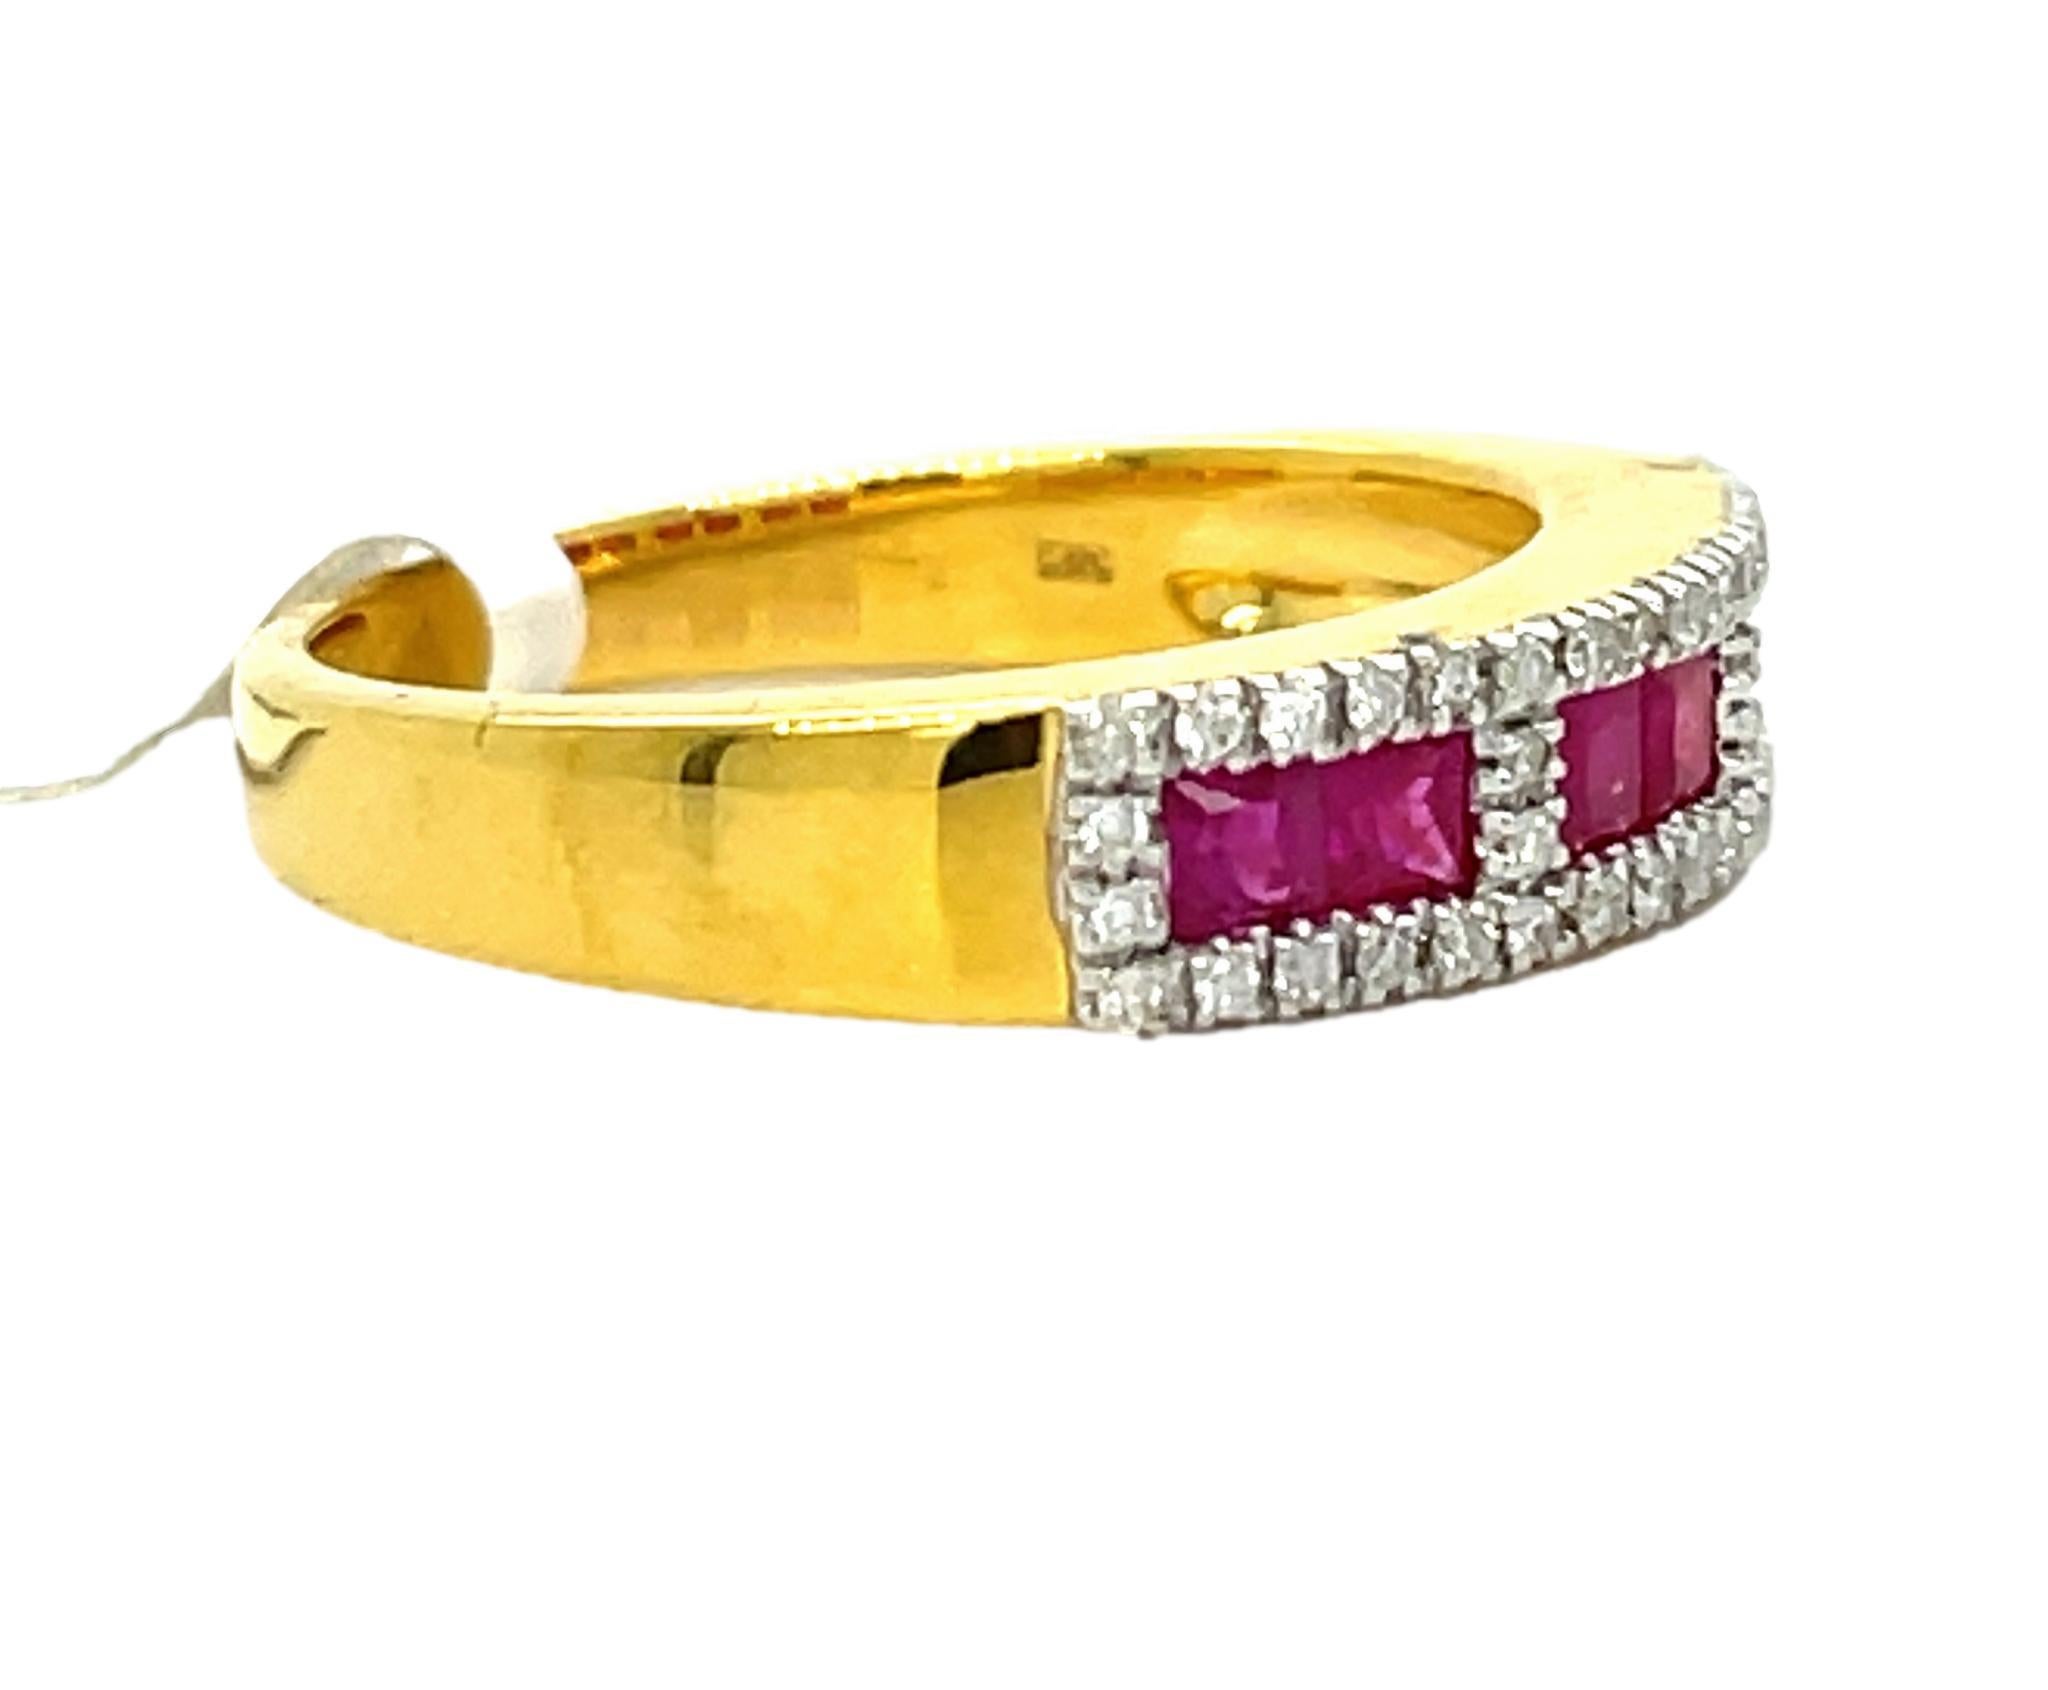 This beautiful natural Ruby and diamond ring is set in 14 karat yellow gold. This ring can be stacked with other rings or worn alone. There are 6 princess cut natural rubies surrounded by sparkling diamonds for a delicate accent. This ring will be